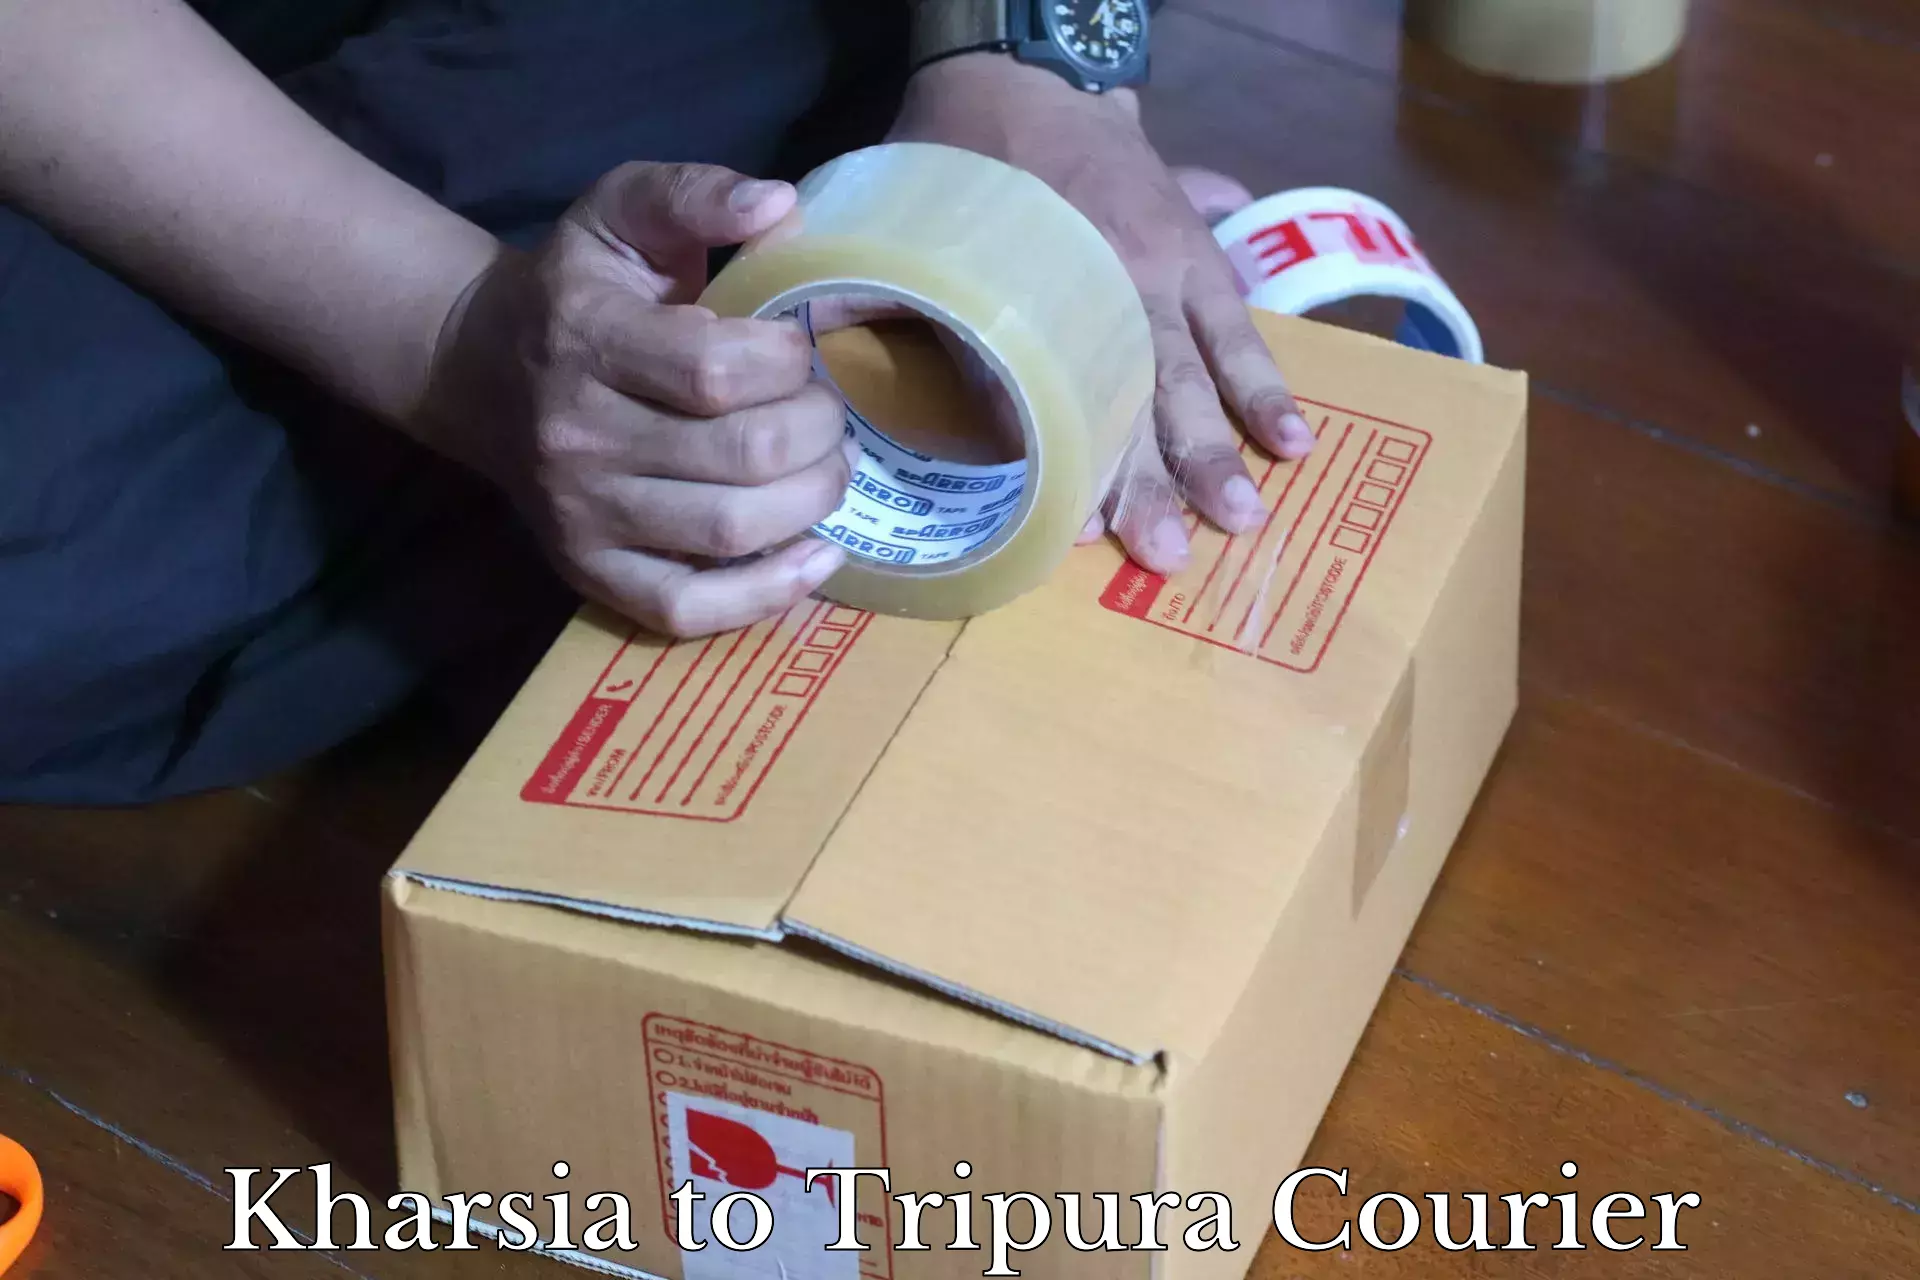 Efficient order fulfillment in Kharsia to South Tripura